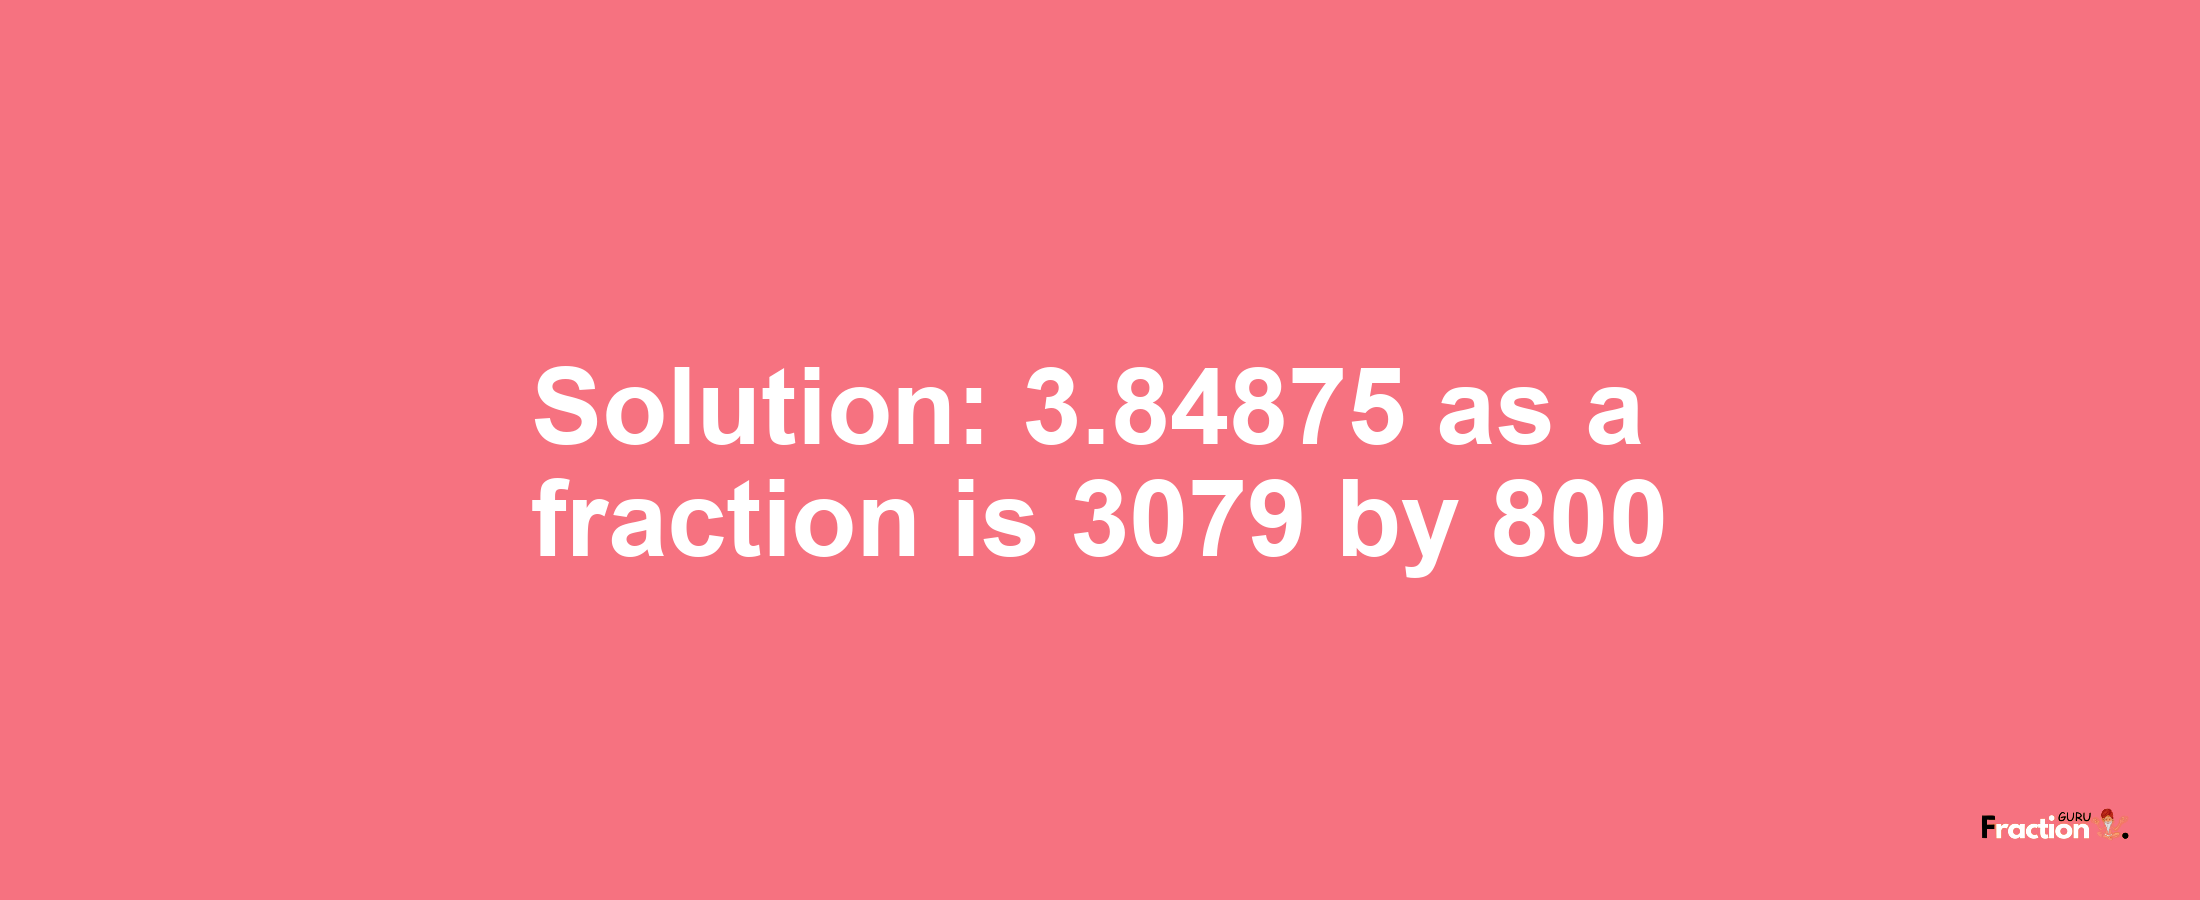 Solution:3.84875 as a fraction is 3079/800